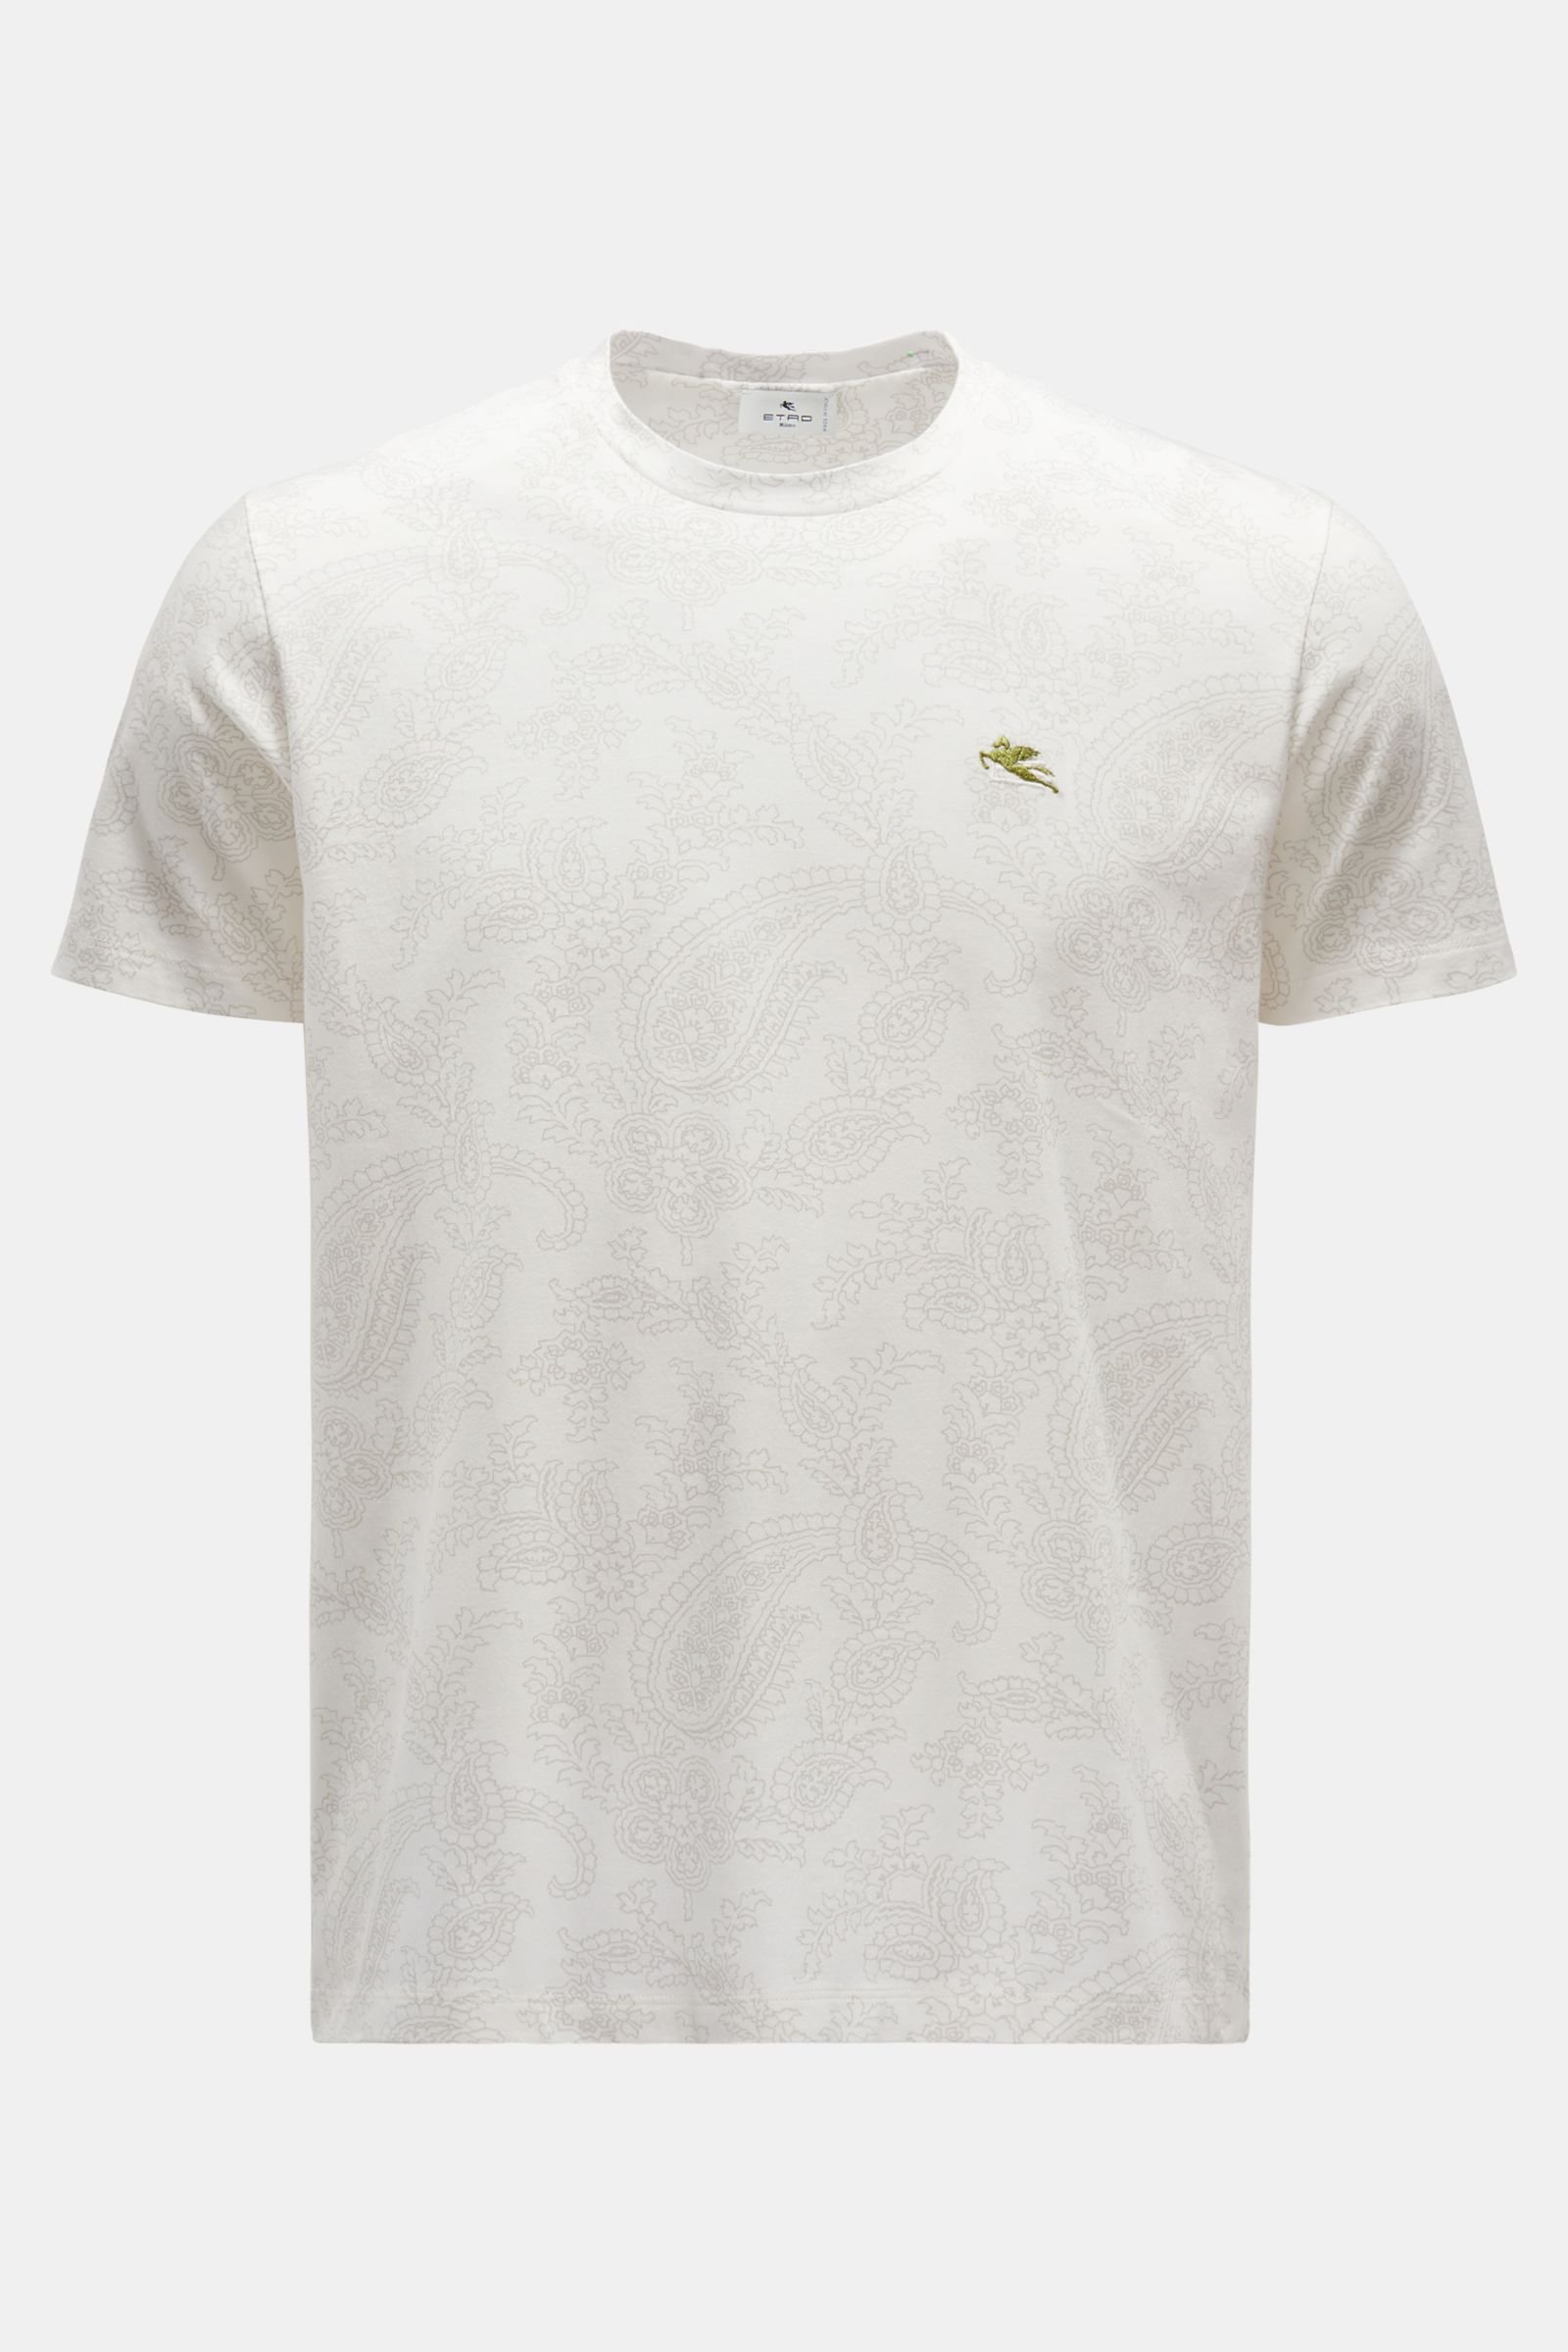 Crew neck T-shirt off-white/light grey patterned